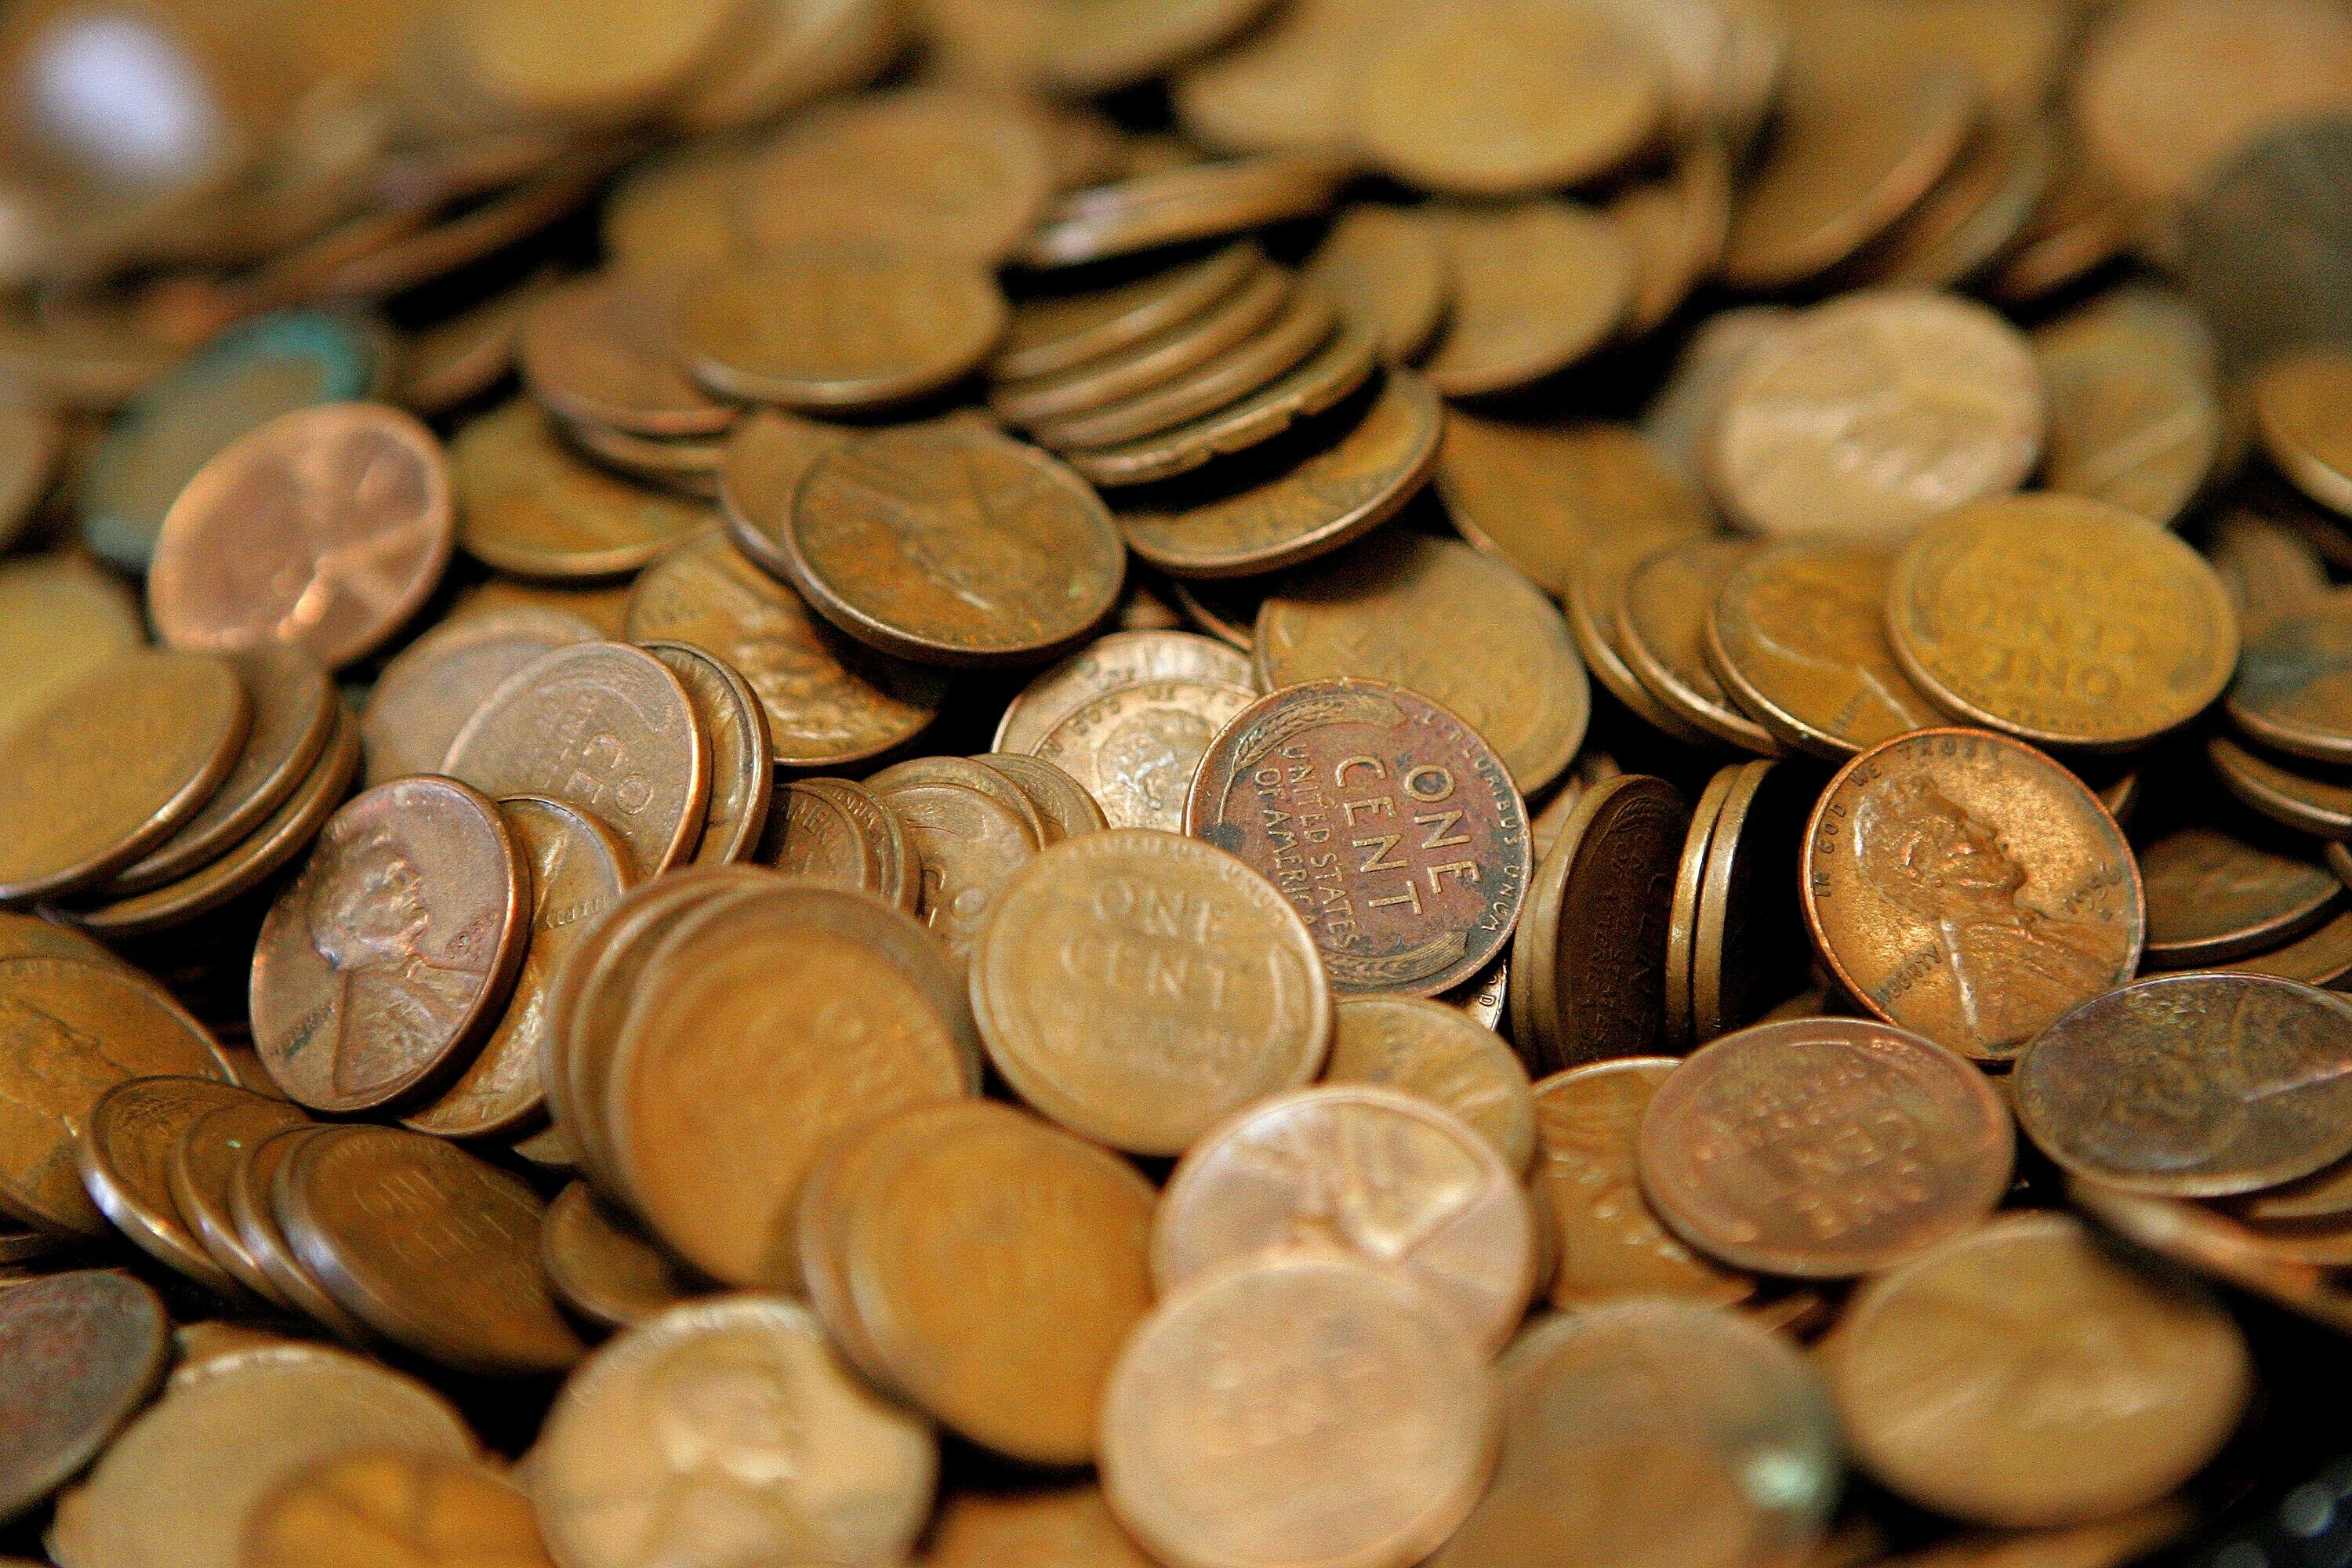 GLENVIEW, IL - JULY 06: Pennies are displayed at Glenview Coin & Collectibles July 6, 2006 in Glenview, Illinois. Reportedly due to manufacturing costs, the US Mint may be contemplating discontinuing the penny.  (Photo by Tim Boyle/Getty Images)